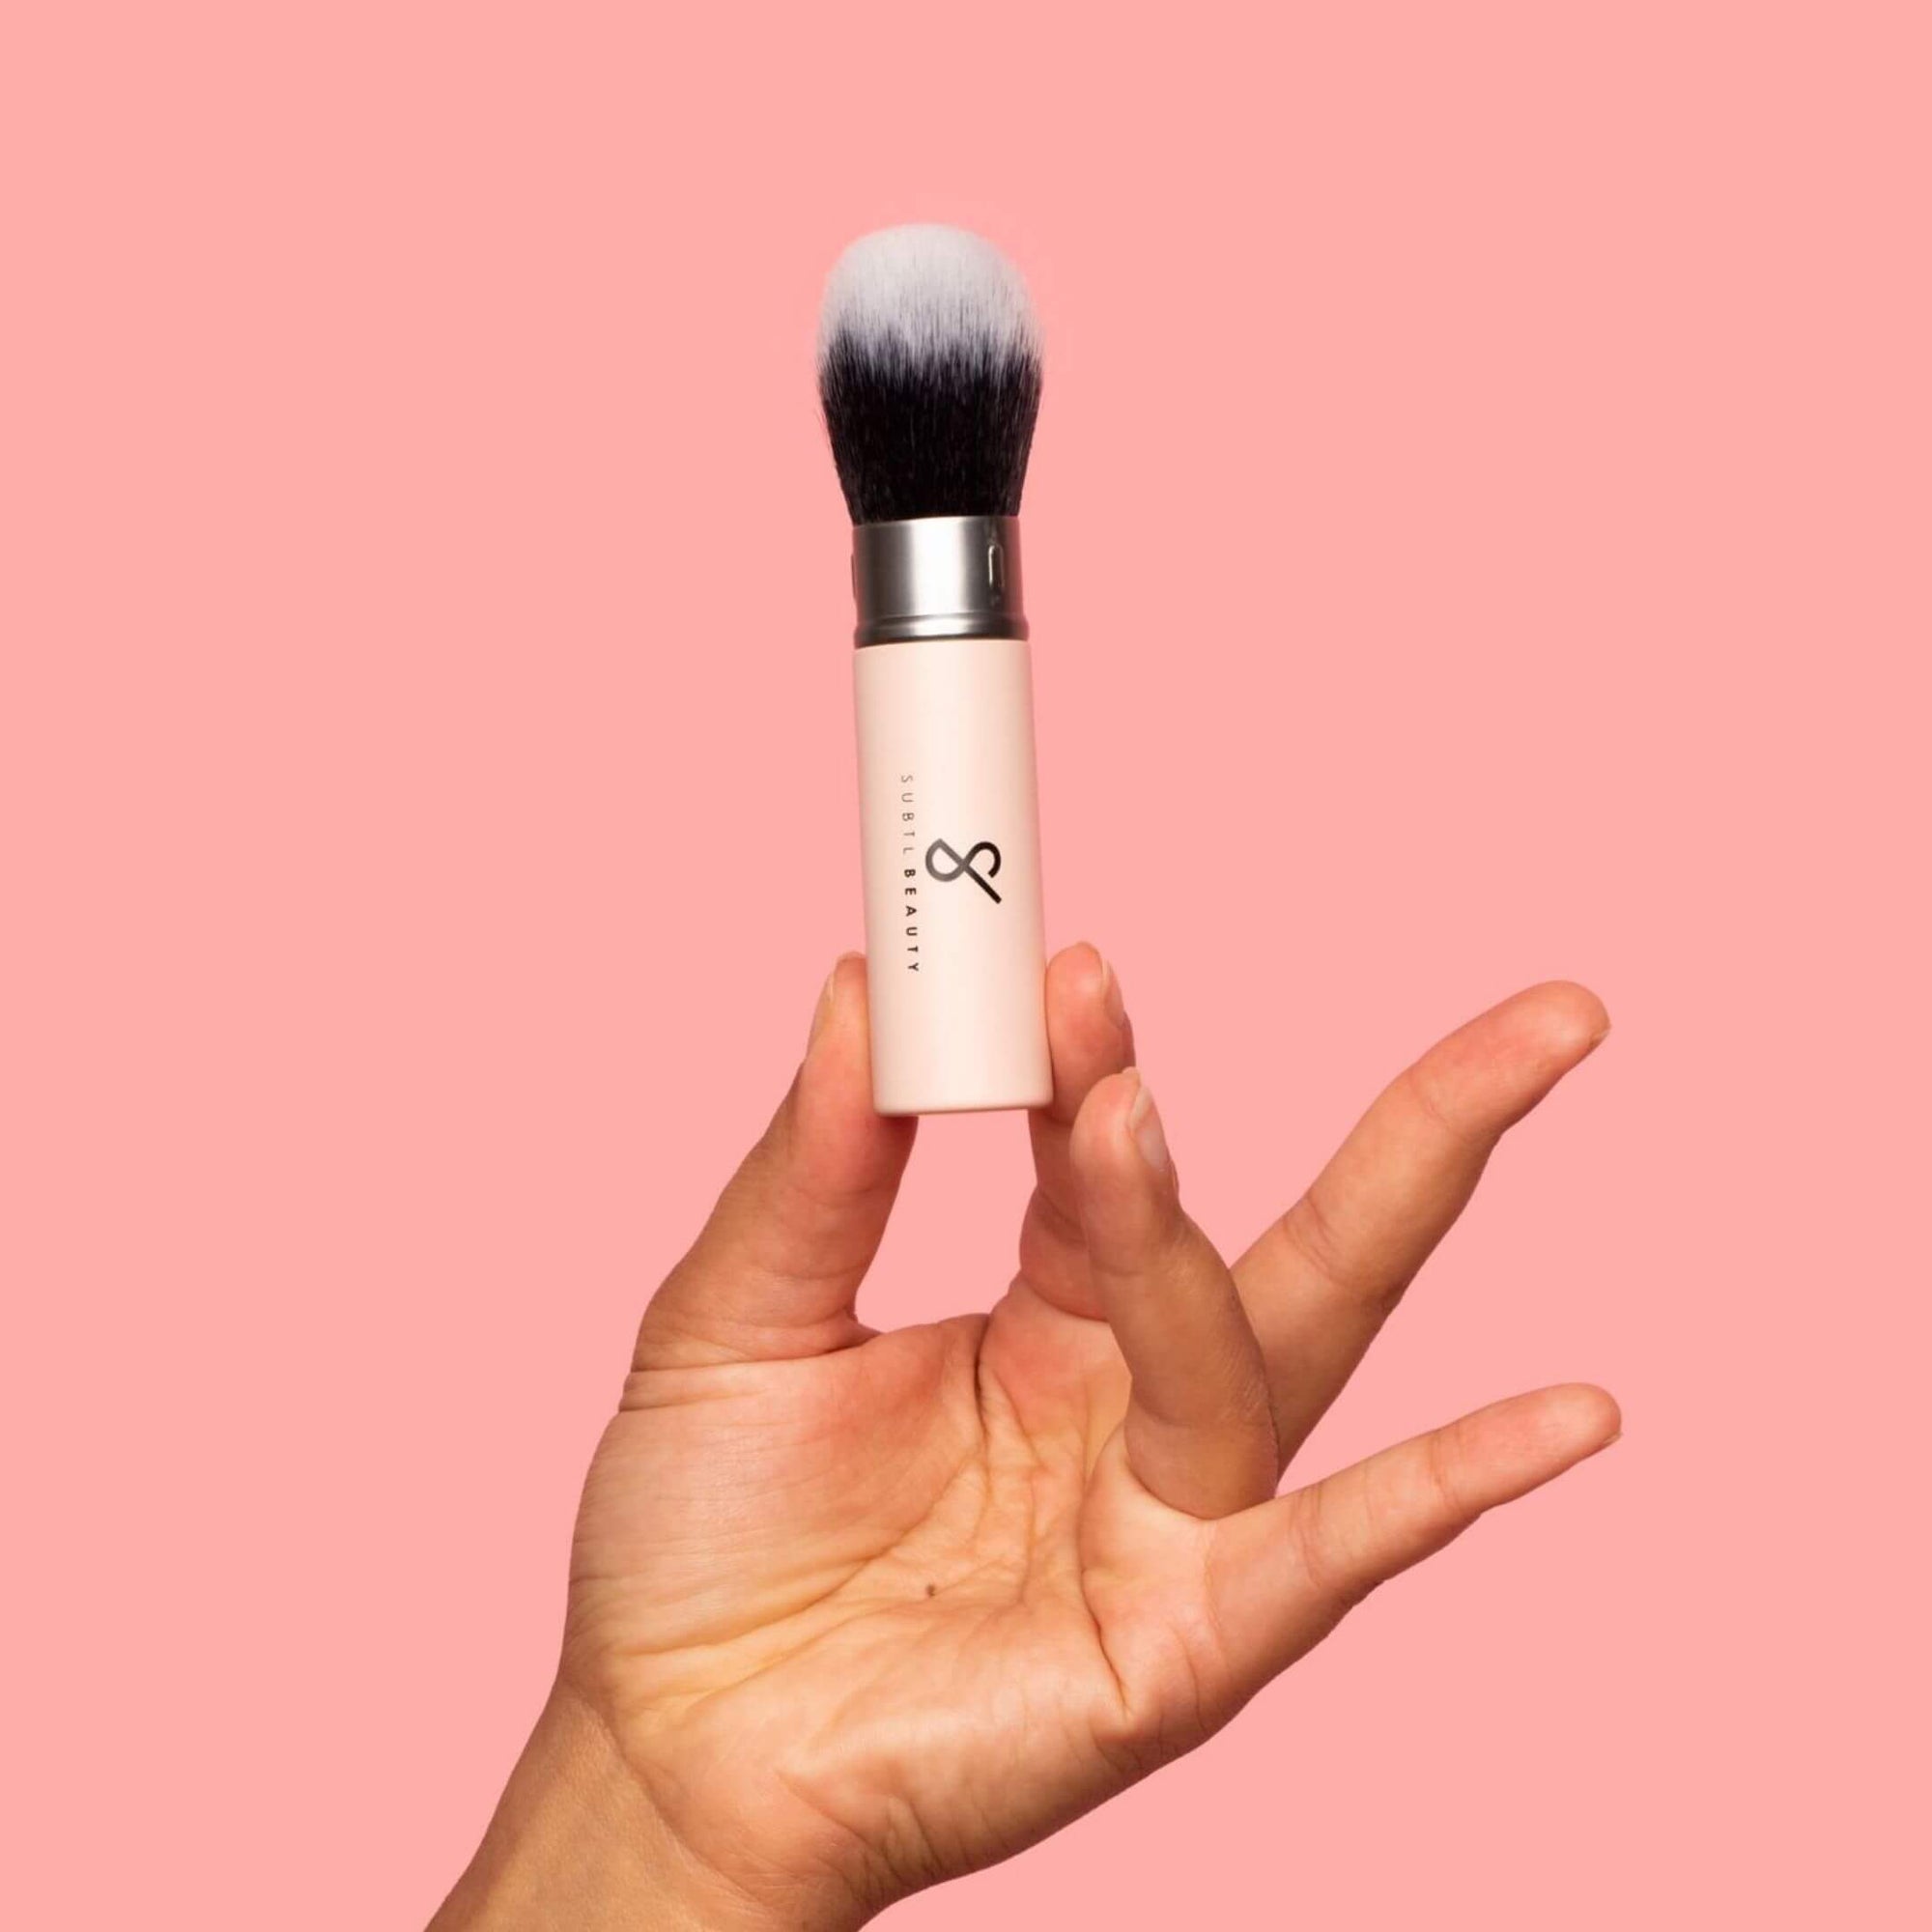 Essential Travel Makeup Brush Perfect For Carry-Ons | Get Free! - Subtl Beauty